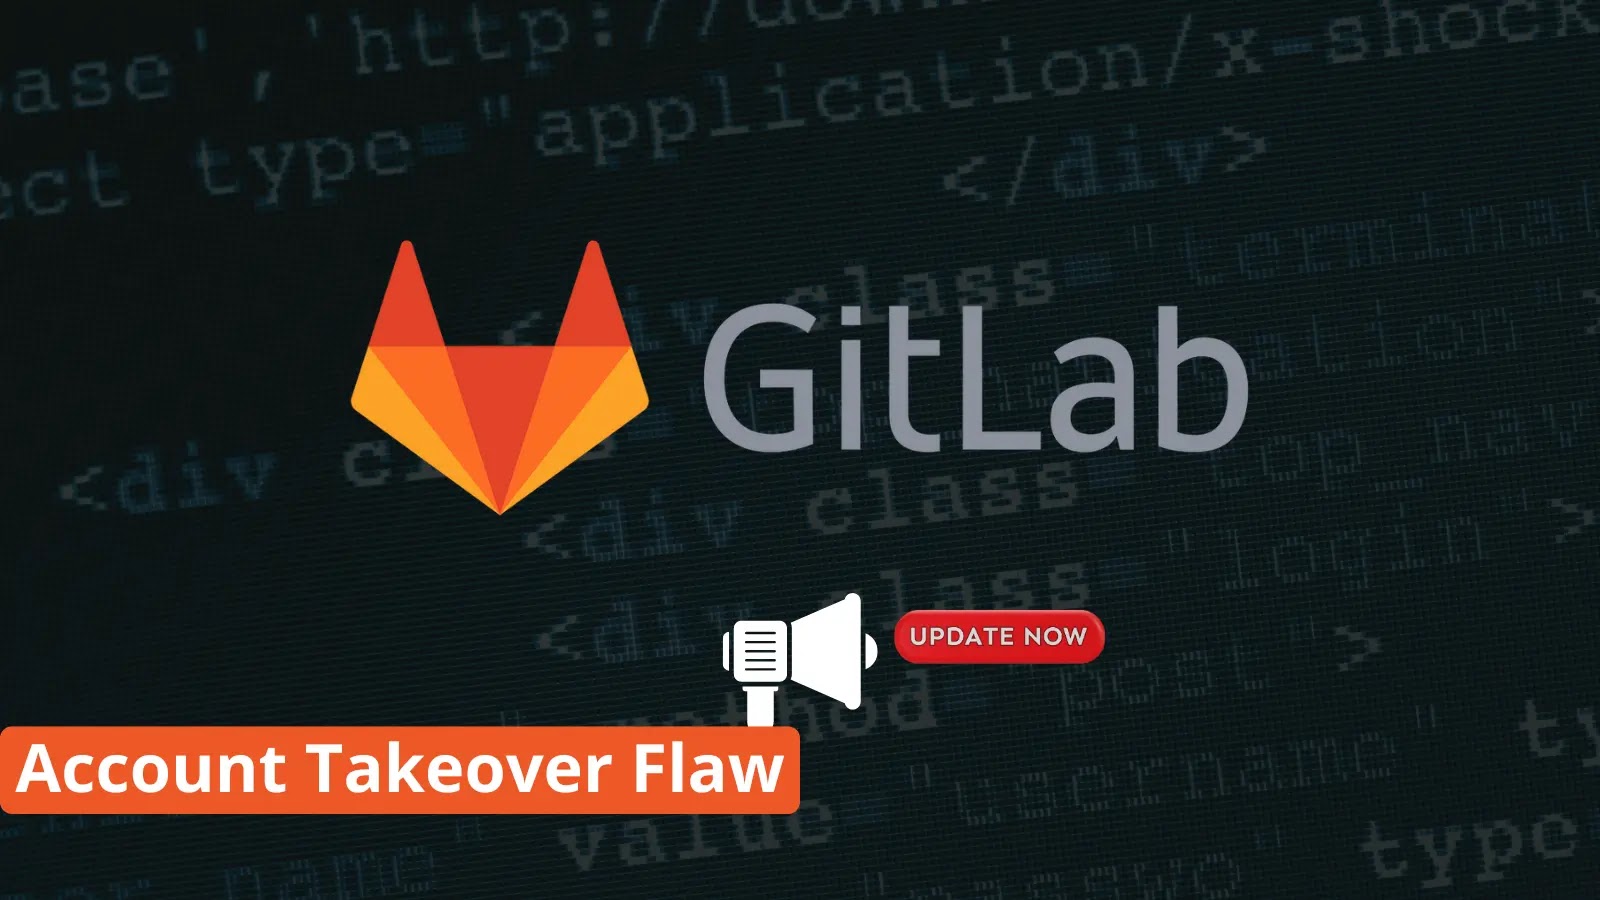 GitLab High-severity Flaw Let Attackers Takeover Account – Update Now